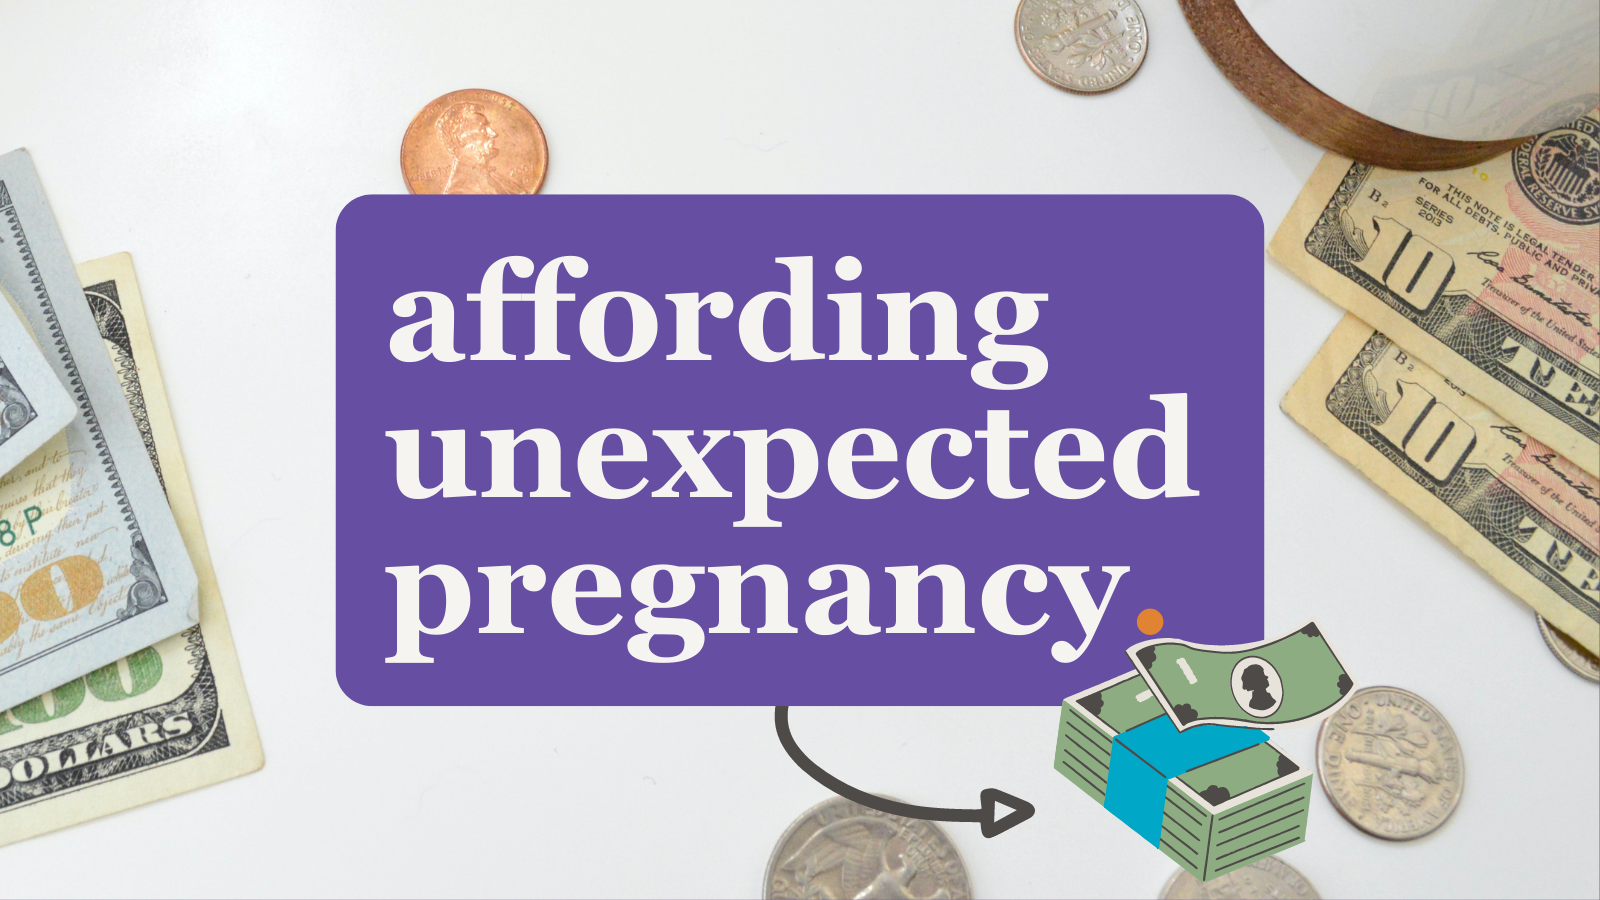 How to afford unexpected pregnancy